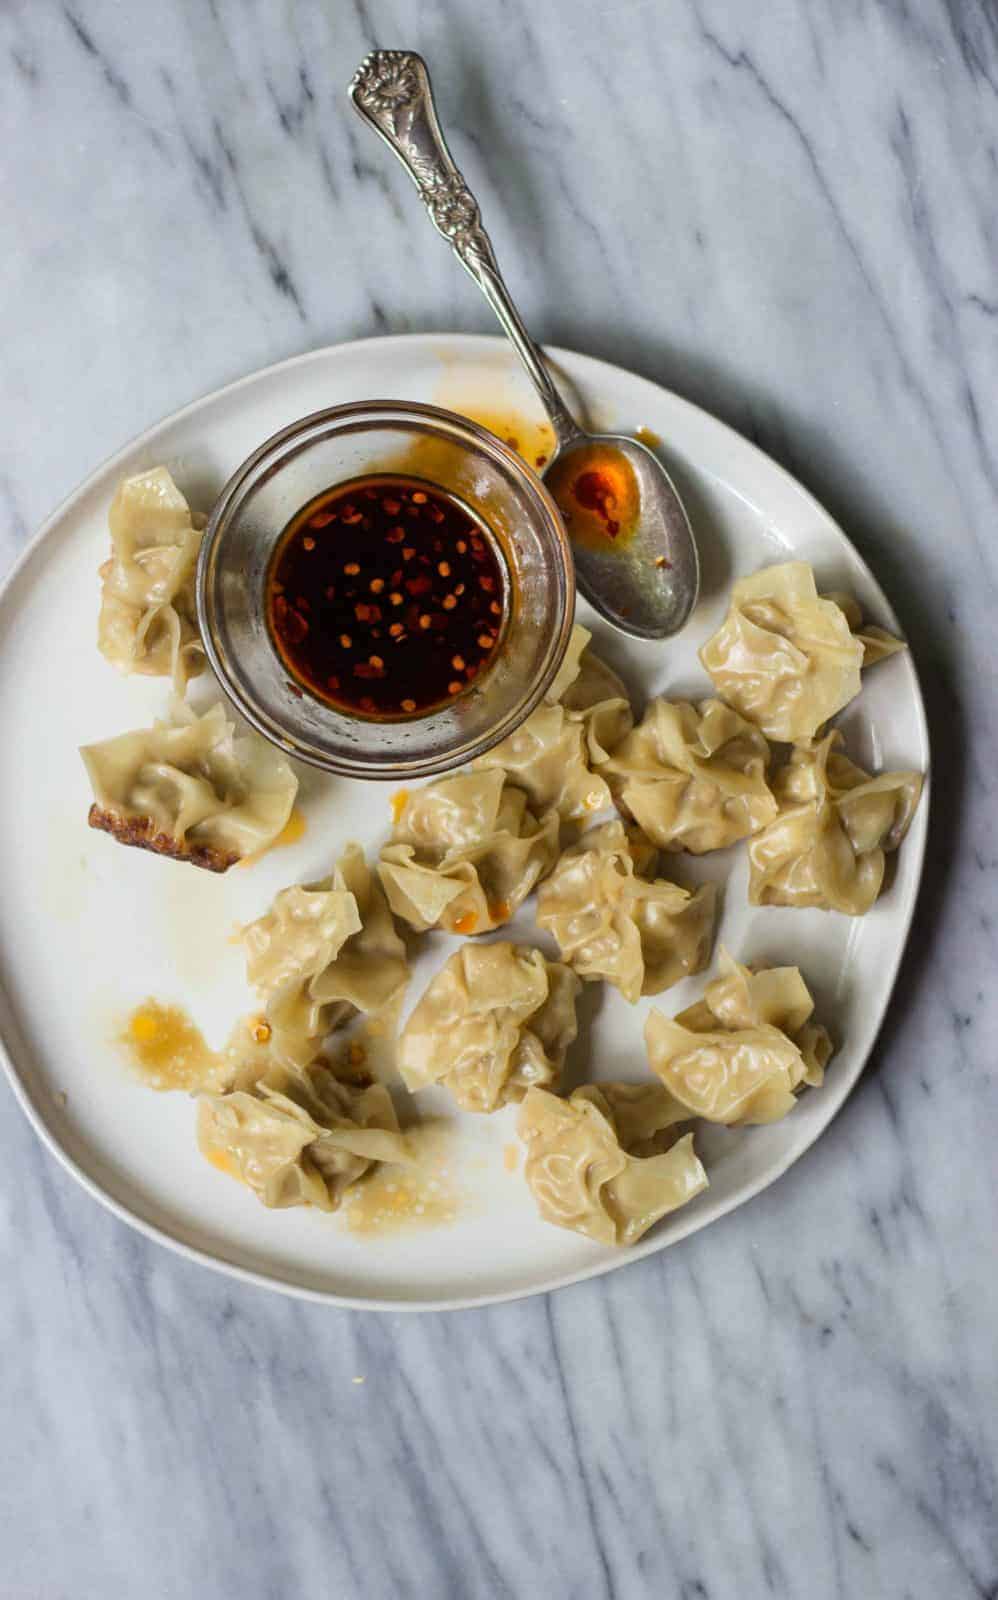 Full plate of Chinese Pork Dumplings with Chili Oil Dipping Sauce